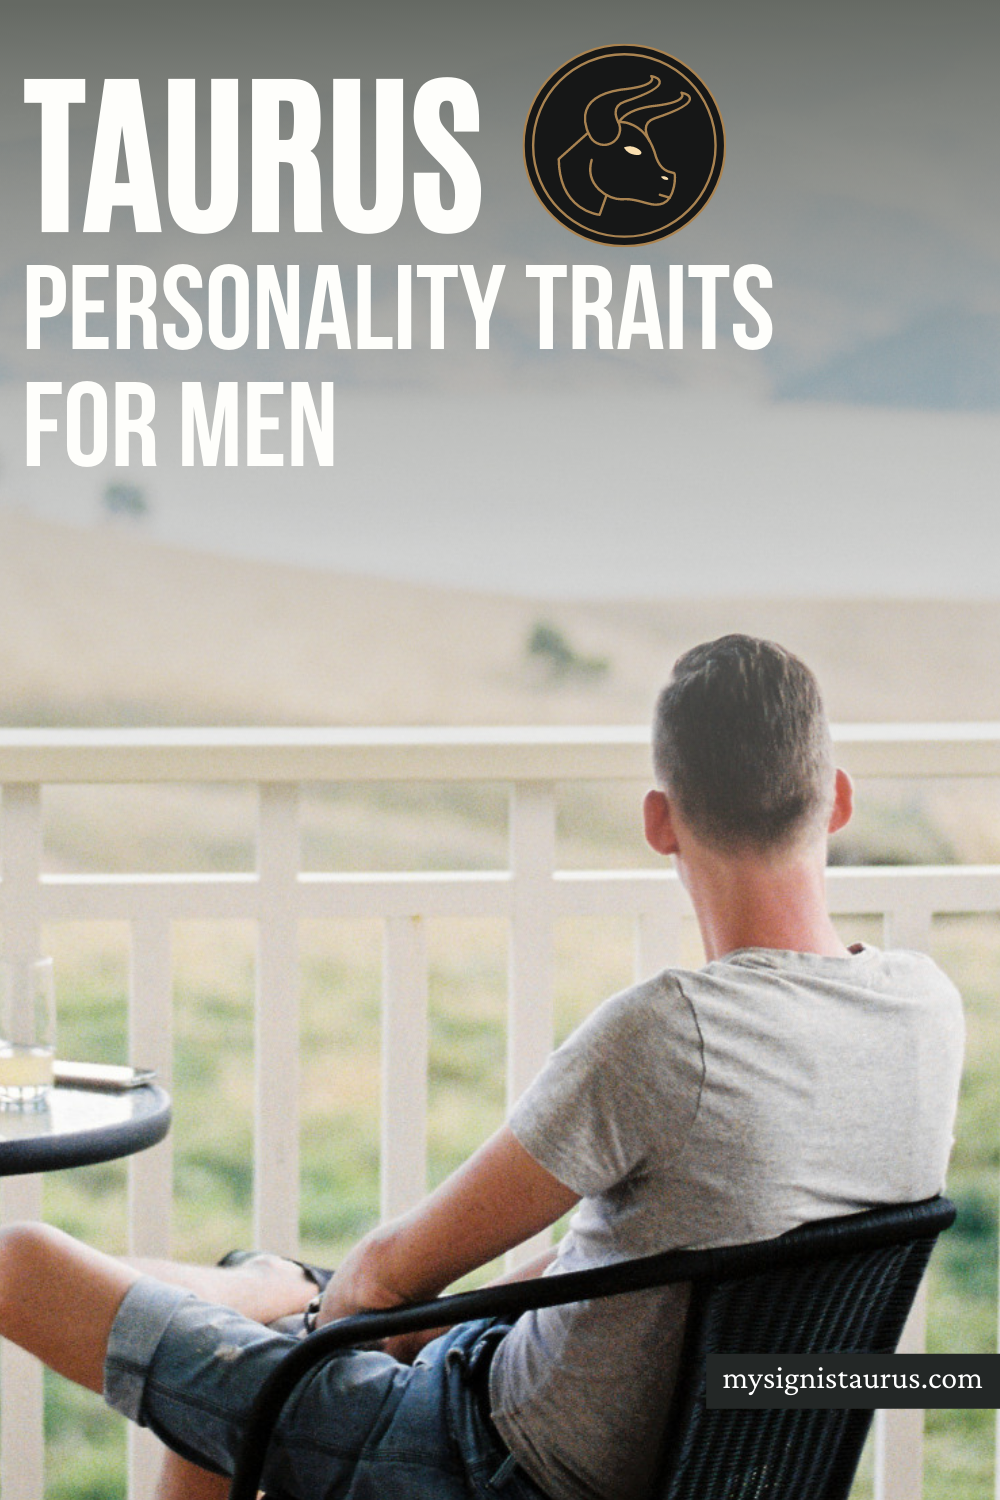 Taurus Personality Traits For Males_ Common Qualities of Taurus Men #taurus #taurusman #taurusmale #taurussign #astrology